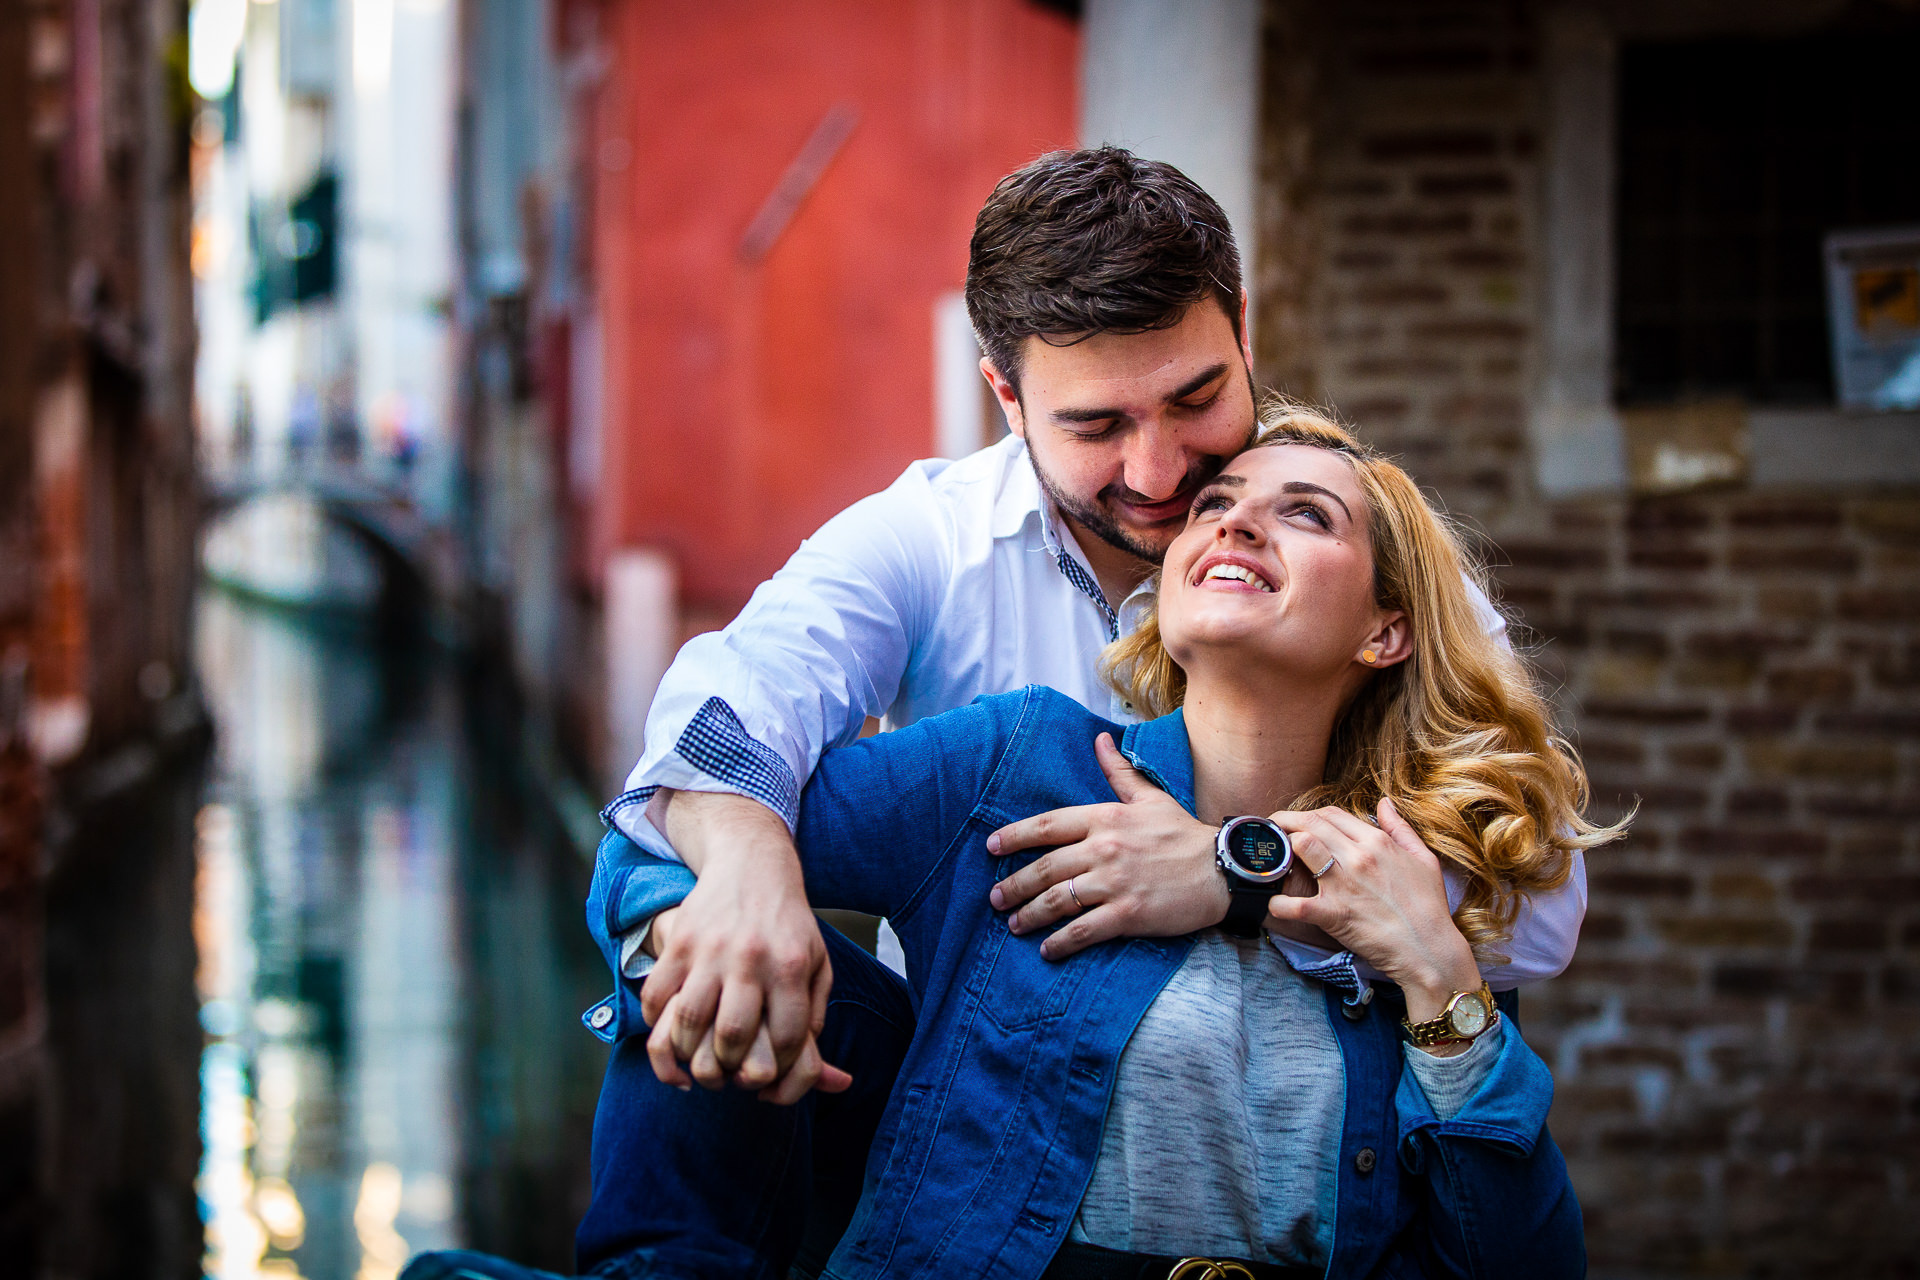 Couple Photo Session In Venice, Italy With Raluca + Costin By Destination Wedding Photographer Mihai Zaharia